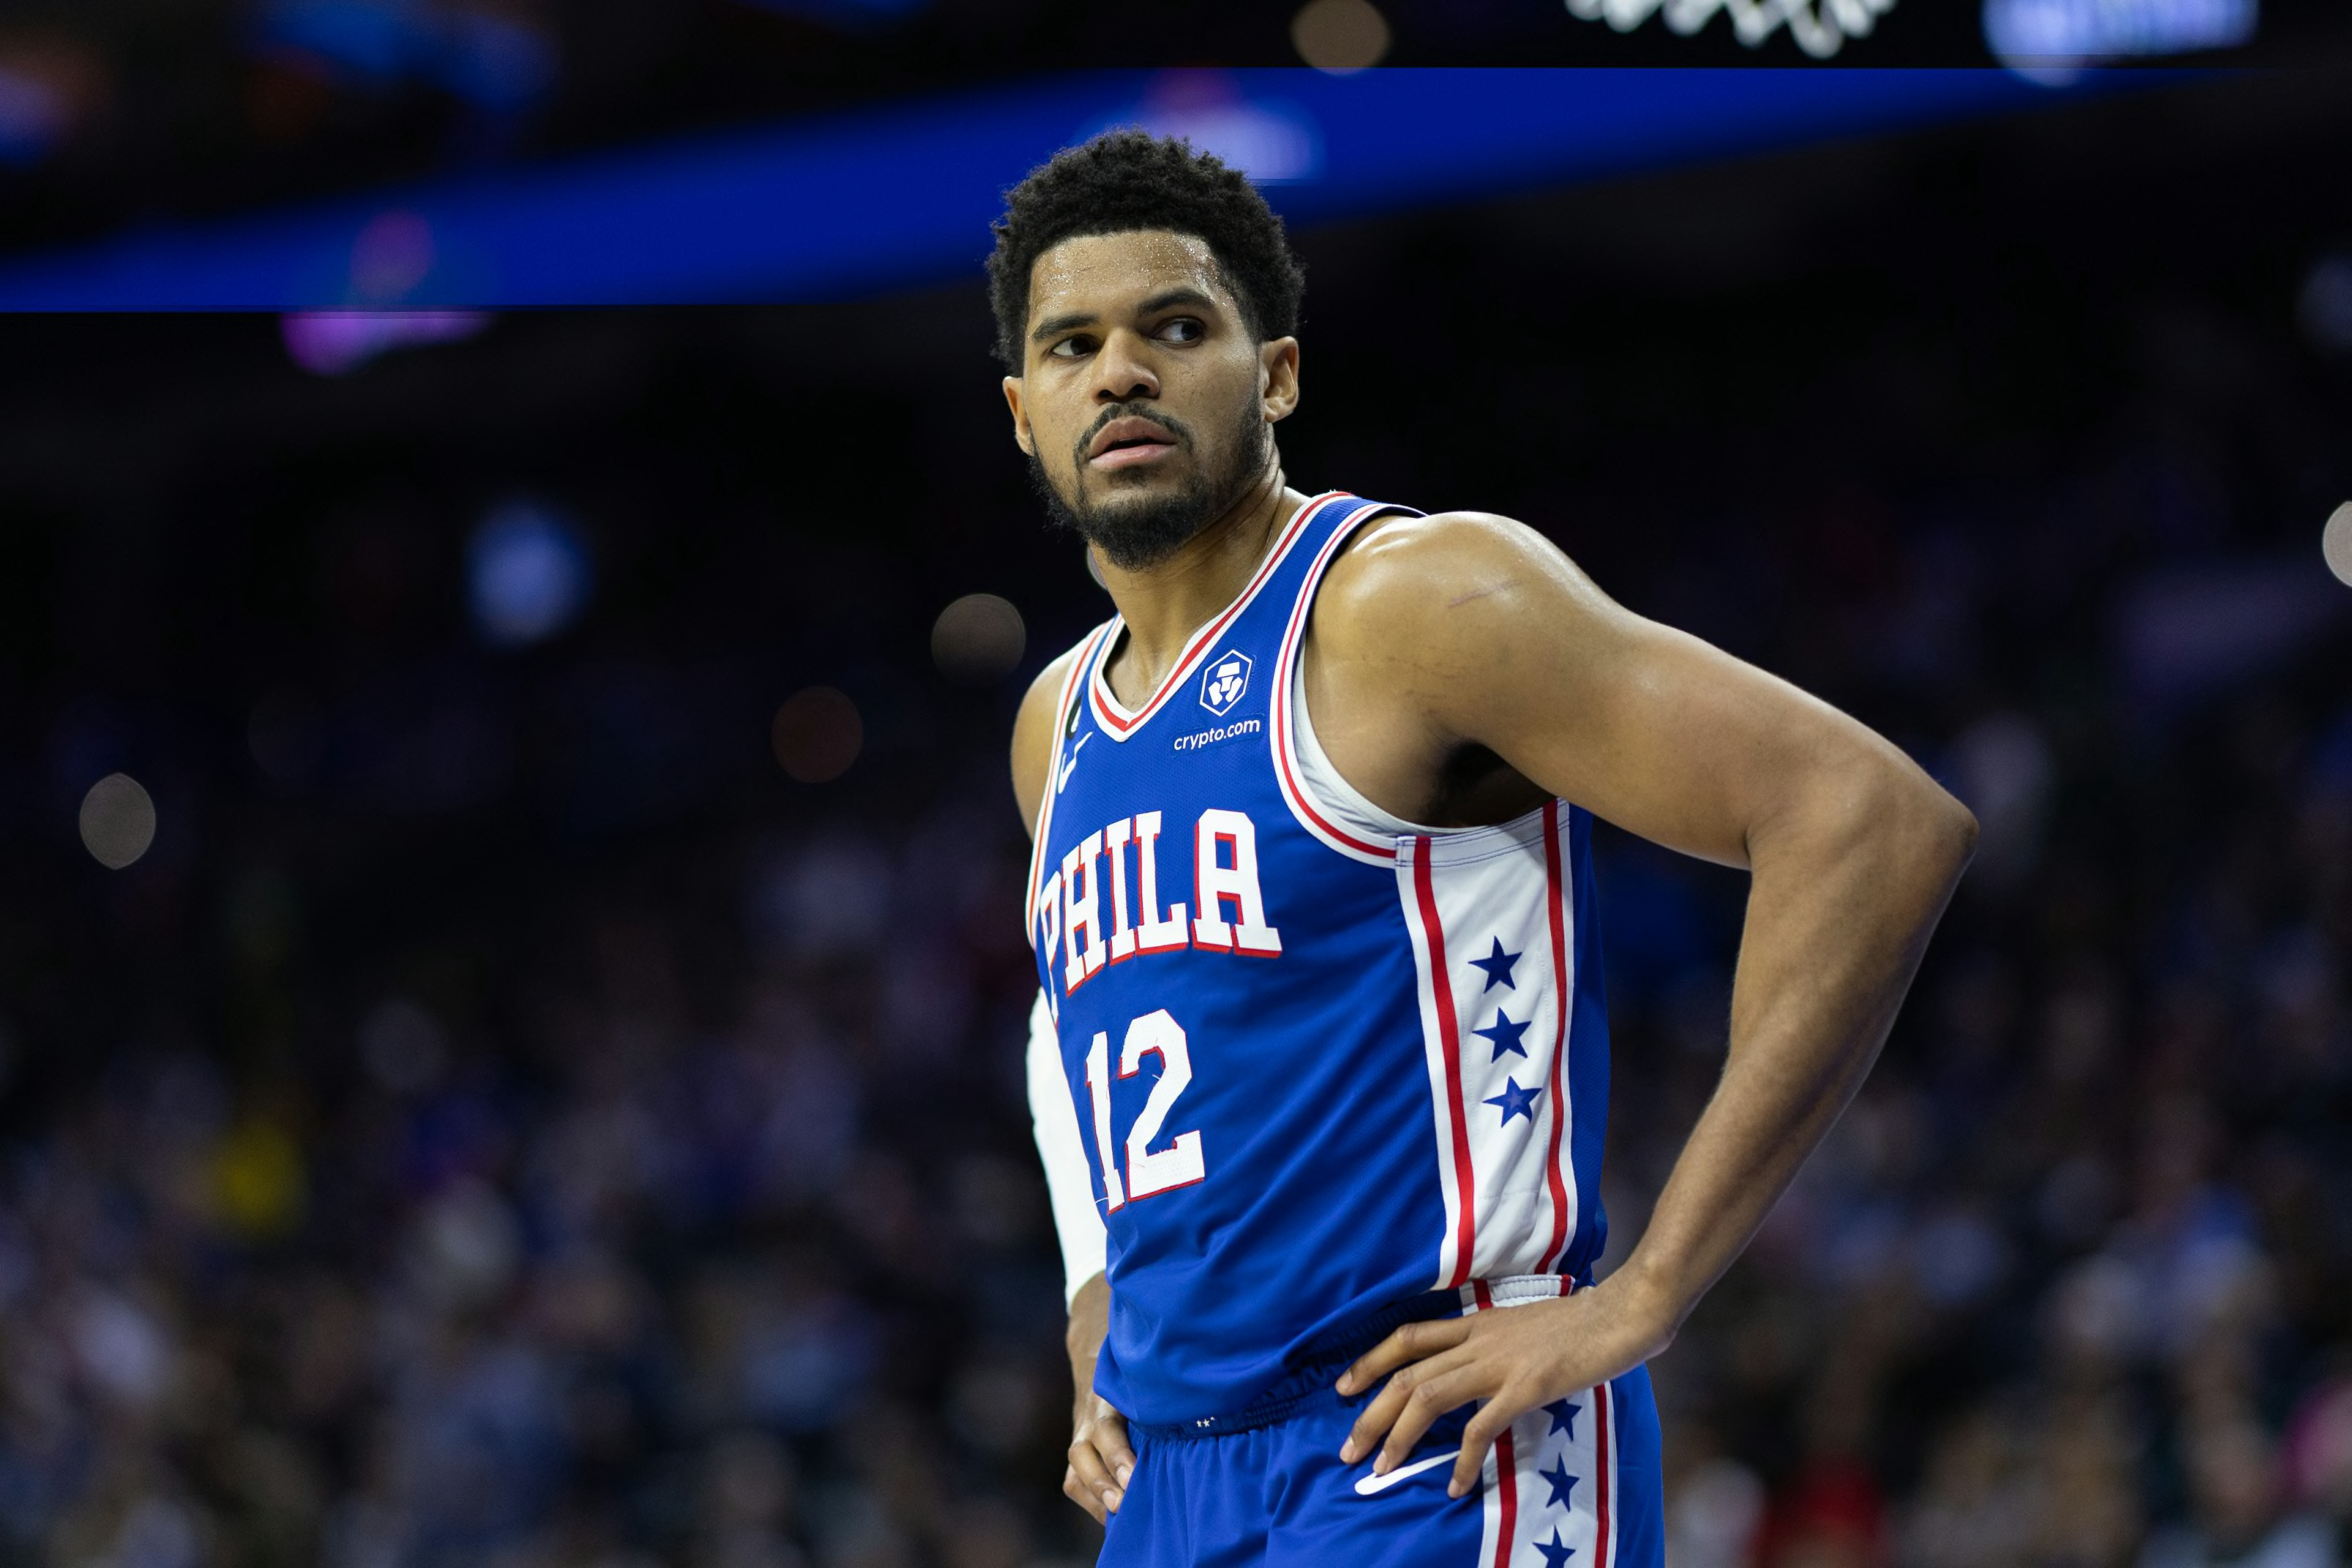 For Younger Generations Though, The Team Is Likely Remembered Most For “The Process Era”, A Period During The Early 2010s When The Players The Sixers Put Out On The Court Were A Revolving Door Of Mediocrity.